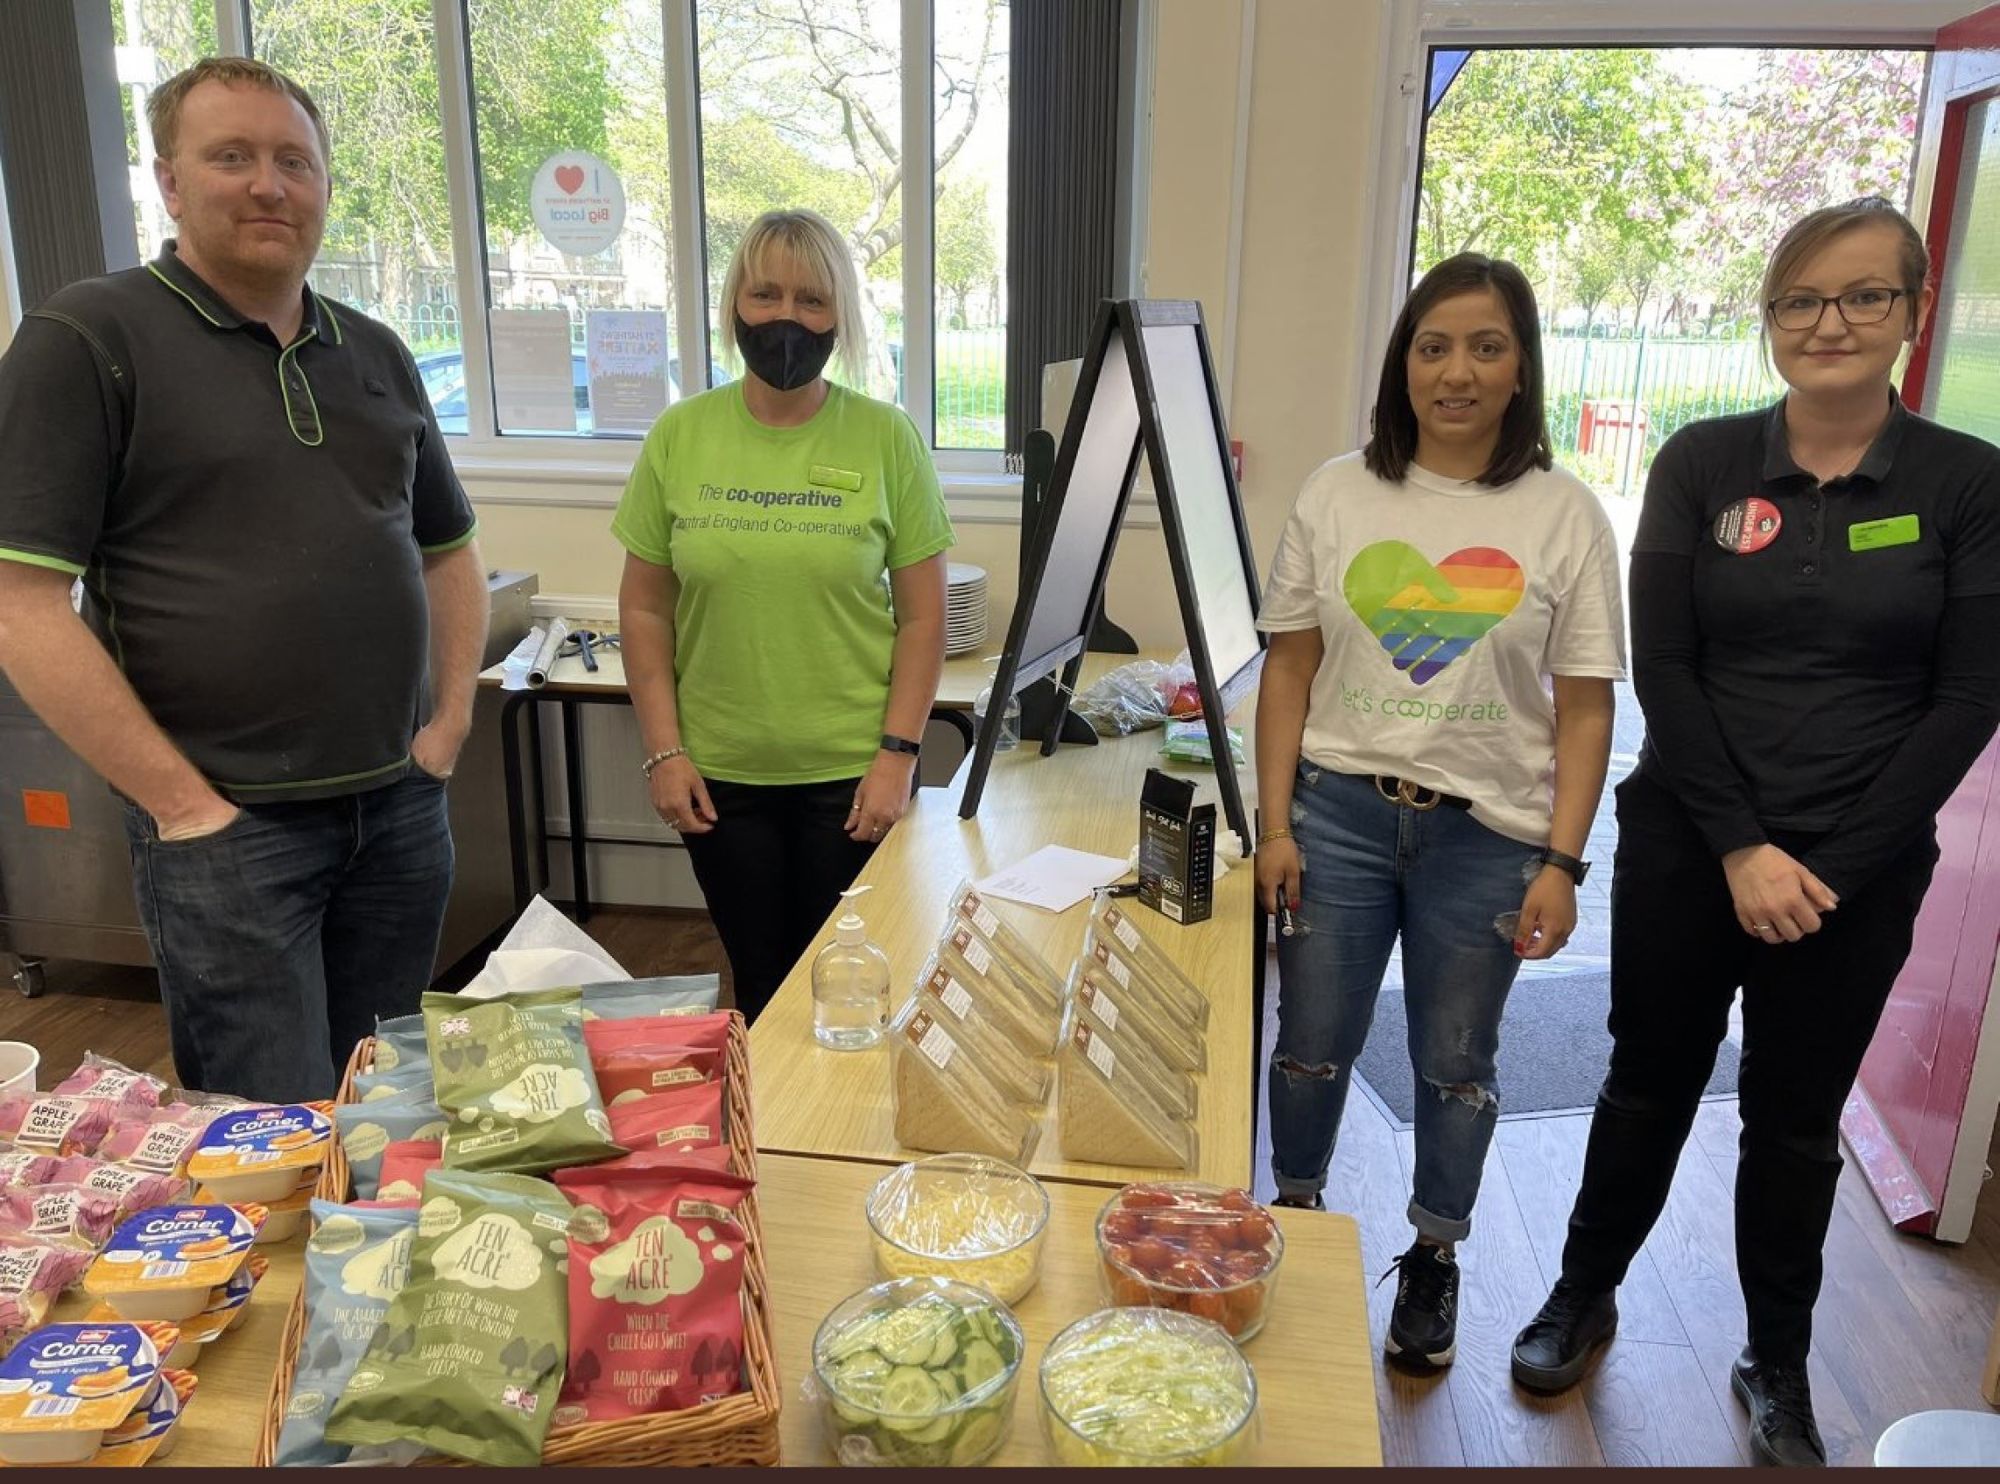 Volunteers help provide hundreds of meals to help fight Easter holiday hunger in Leicester